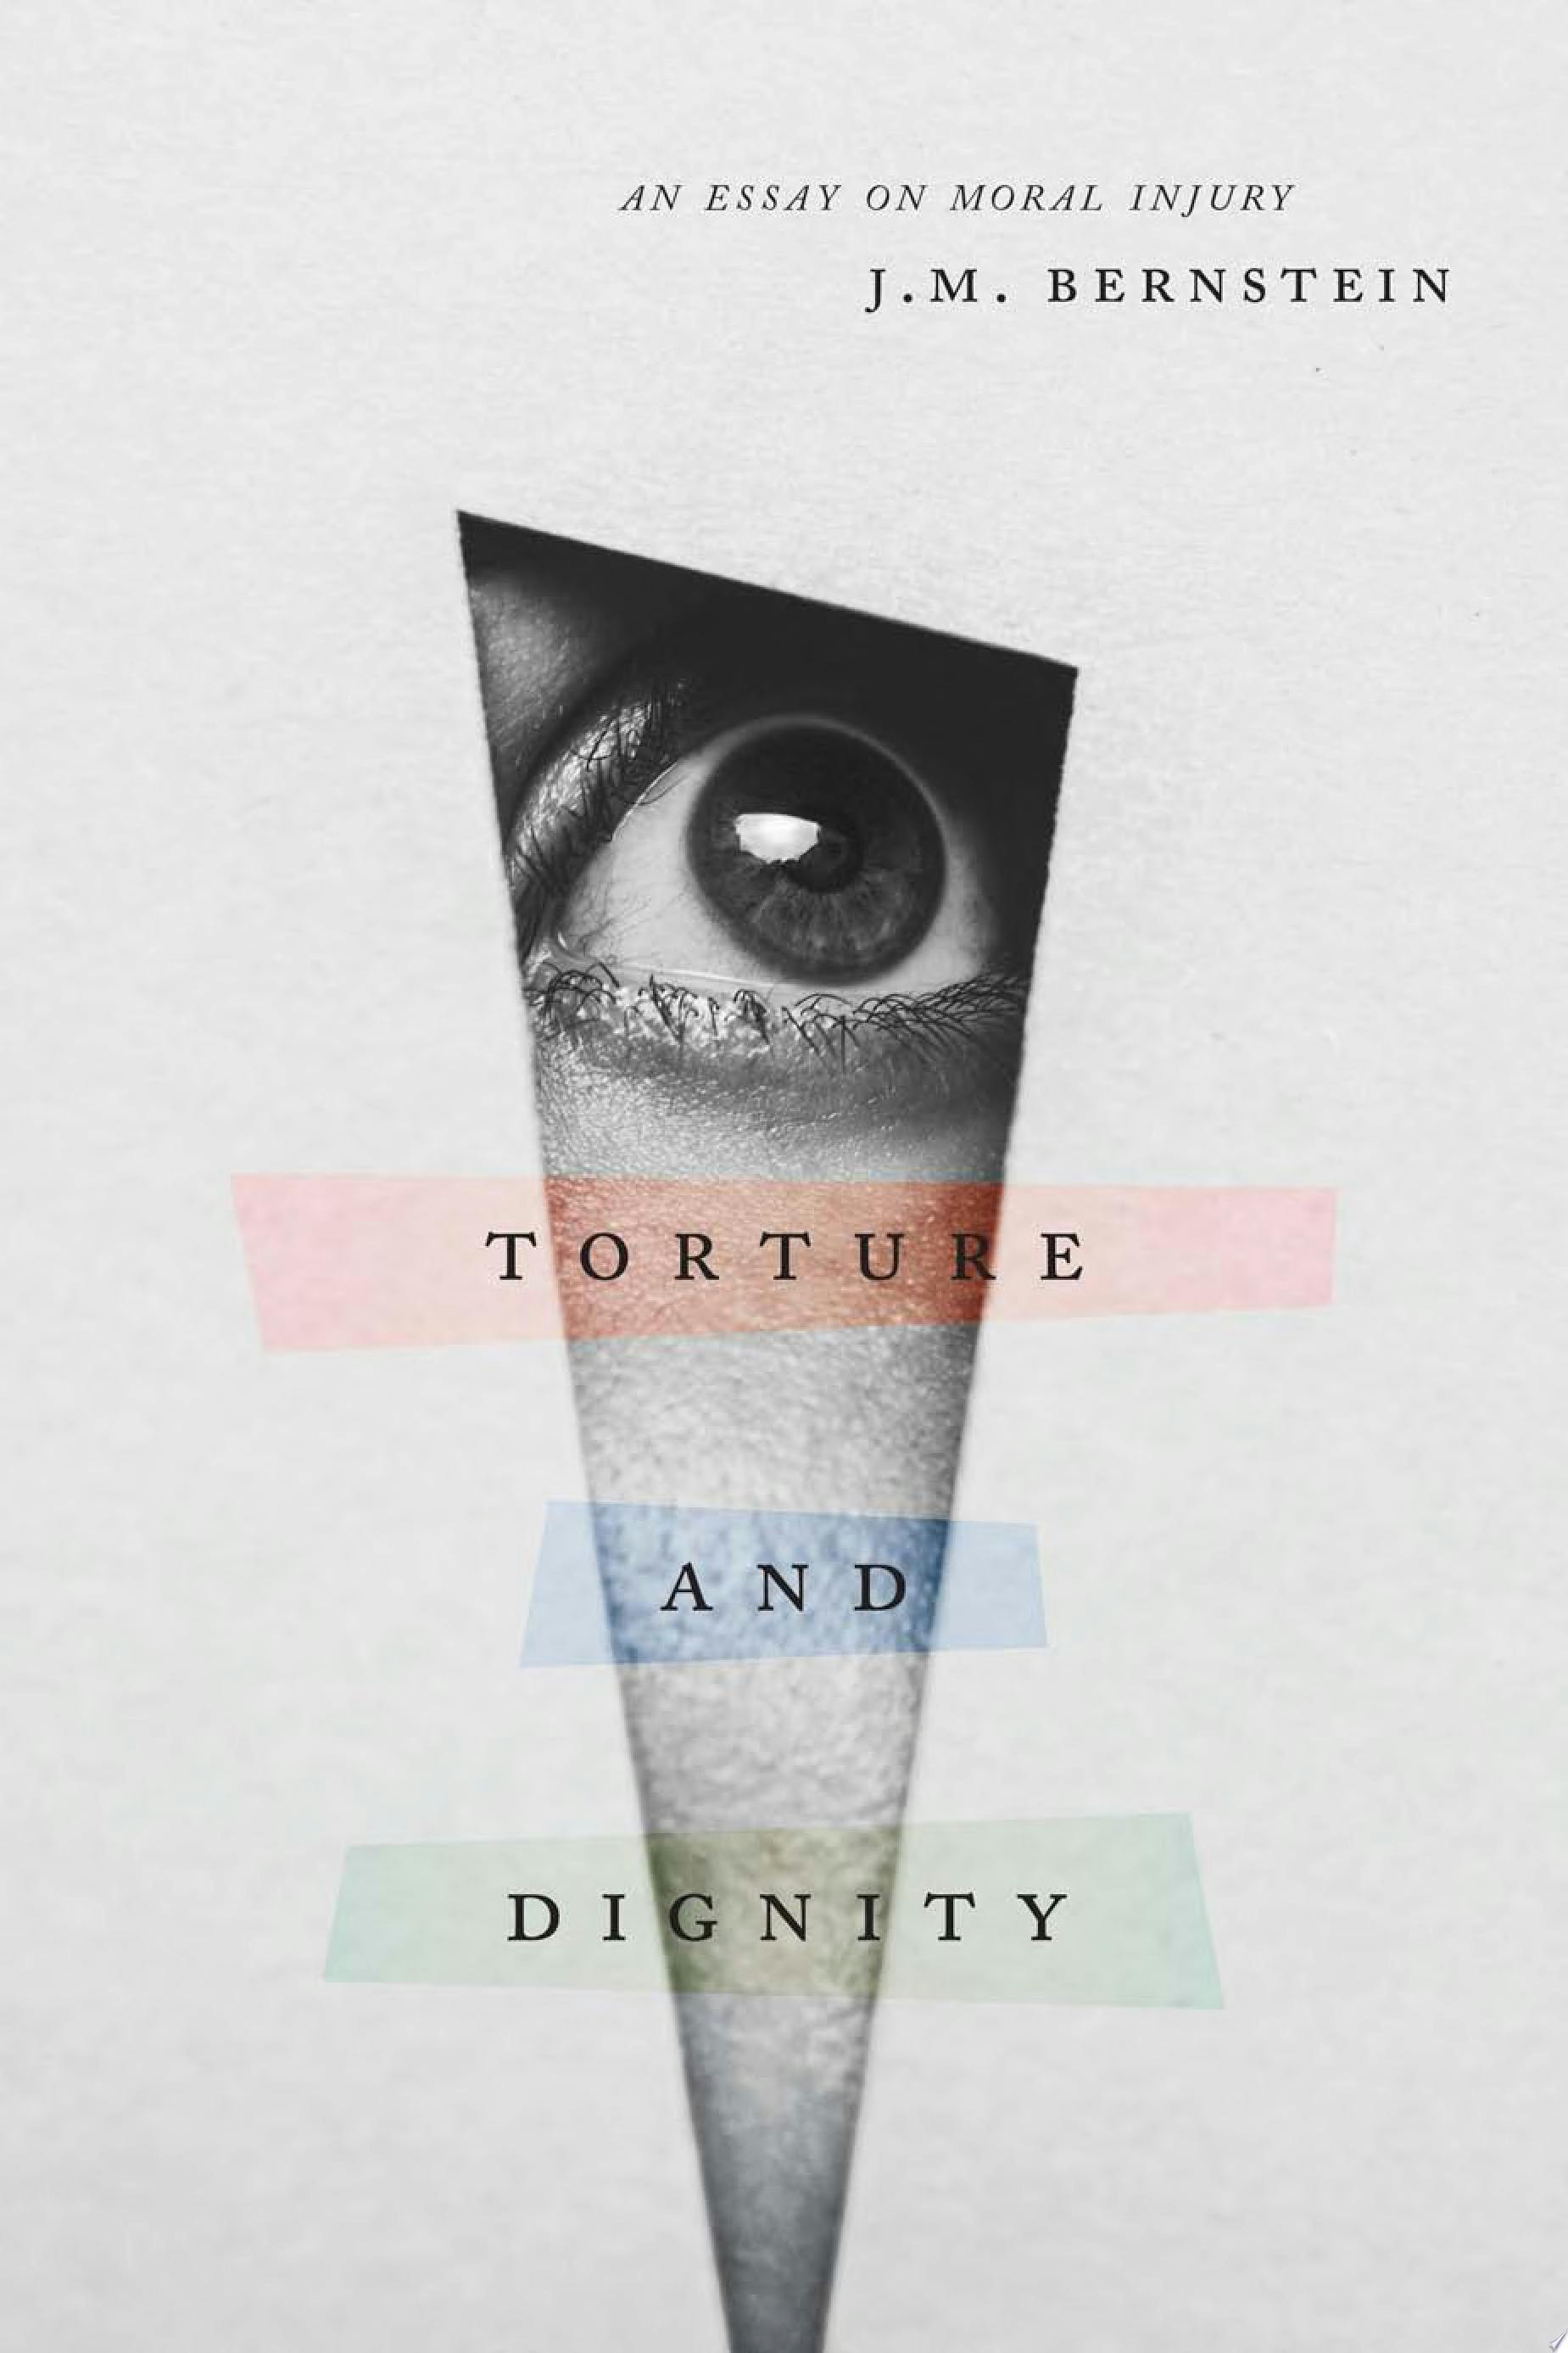 Torture and Human Dignity: An Essay on Moral Injury